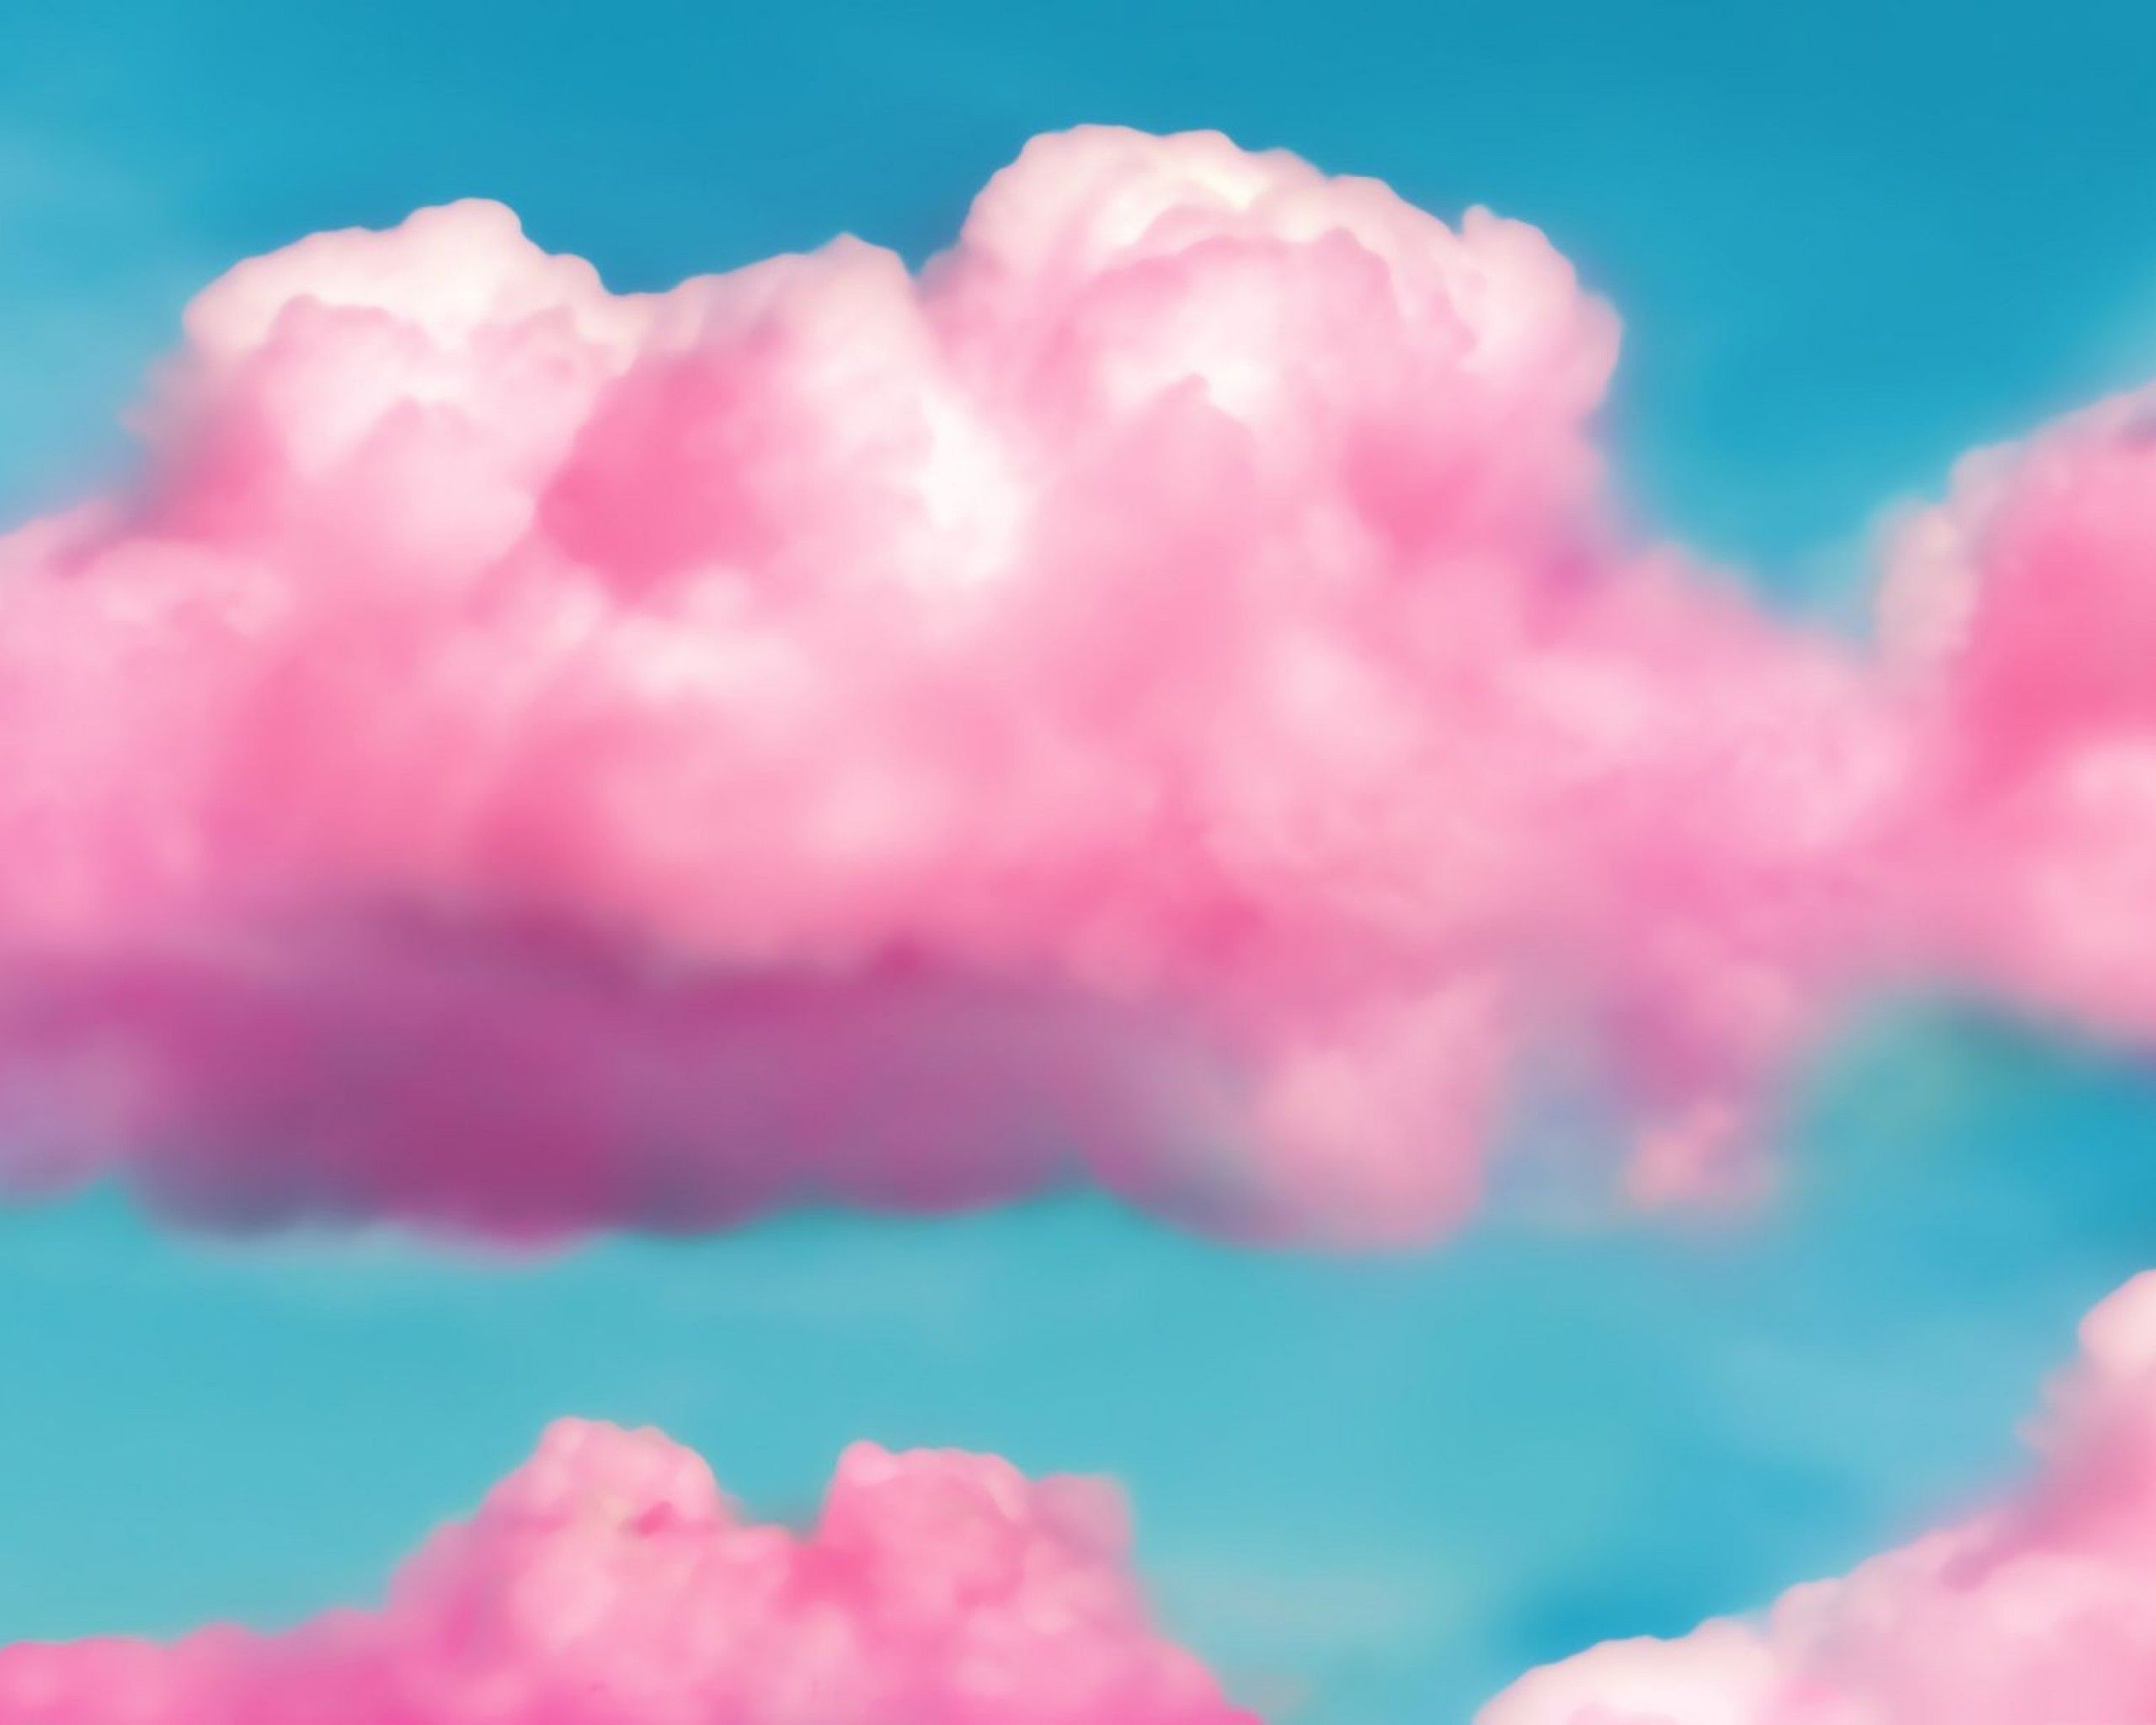 2560x2048 Pink And Blue Sky Wallpapers For Iphone | Pink clouds, Cloud art, Blue sky wallpaper